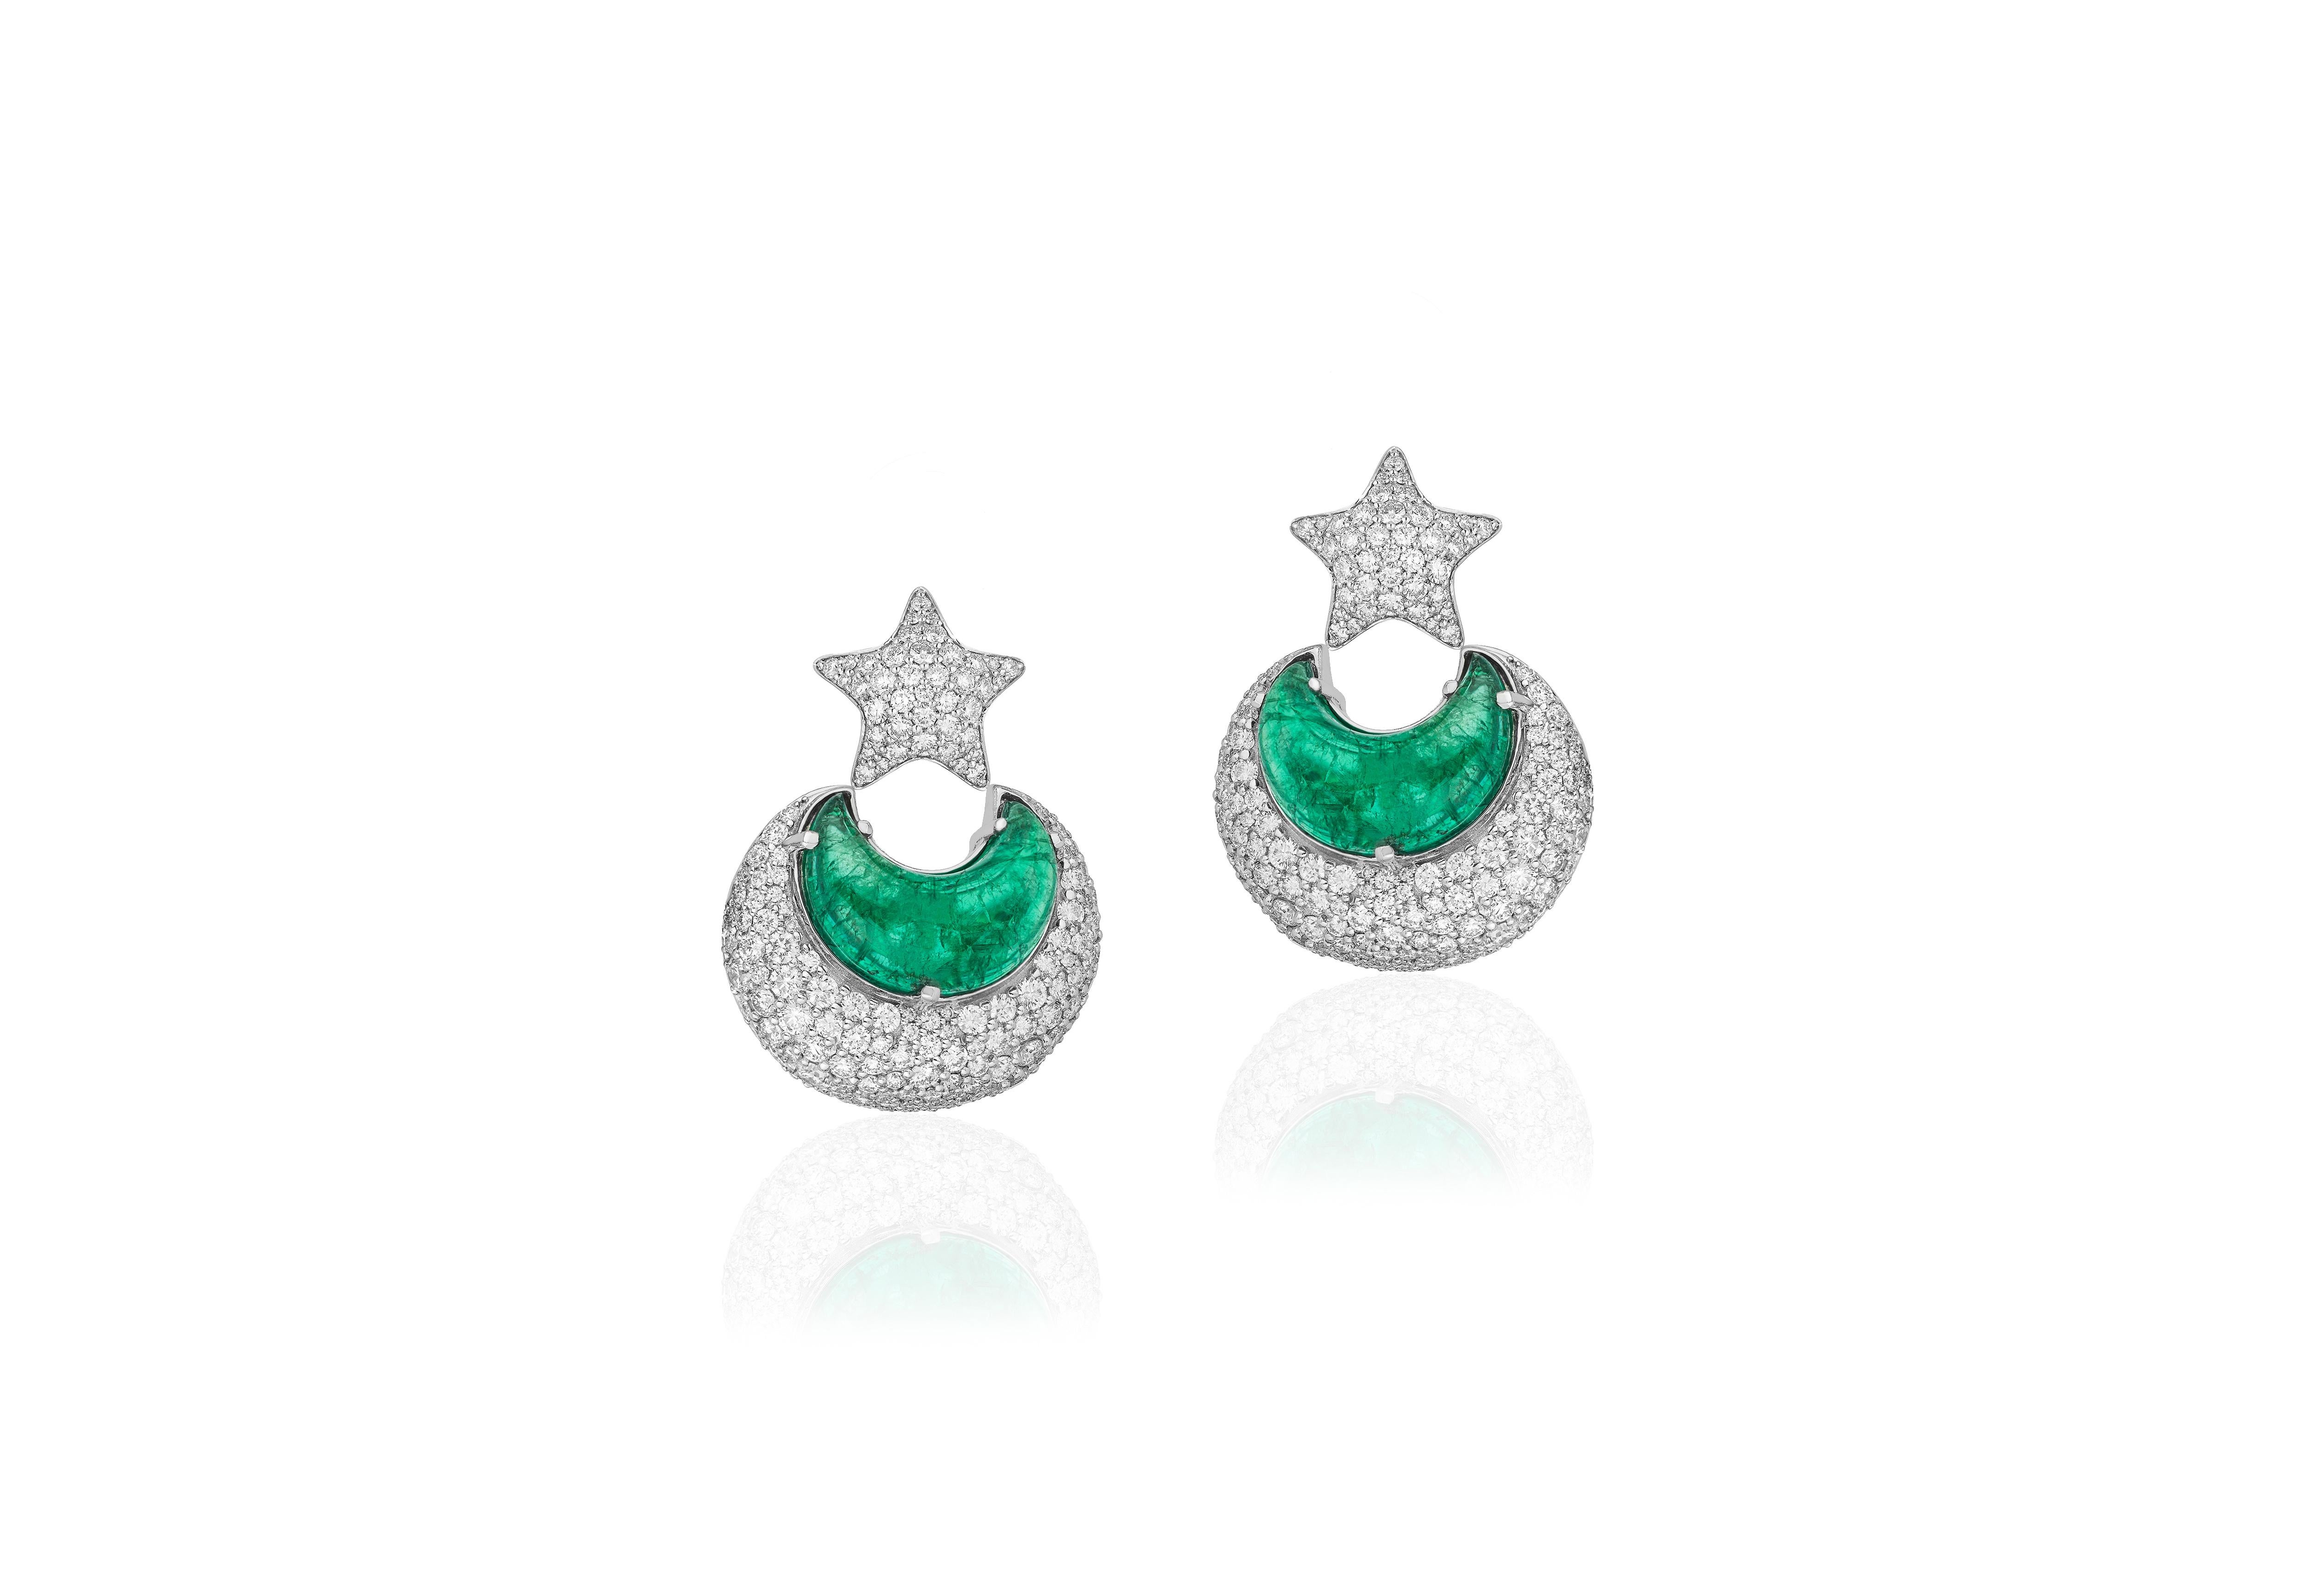 Emerald Moon Shape Earrings with Diamonds in 18k White Gold, from 'G-One' Collection

Gemstone Weight: 13.48 Carats

Diamond: G-H / VS, Approx Wt: 5.66 Carats